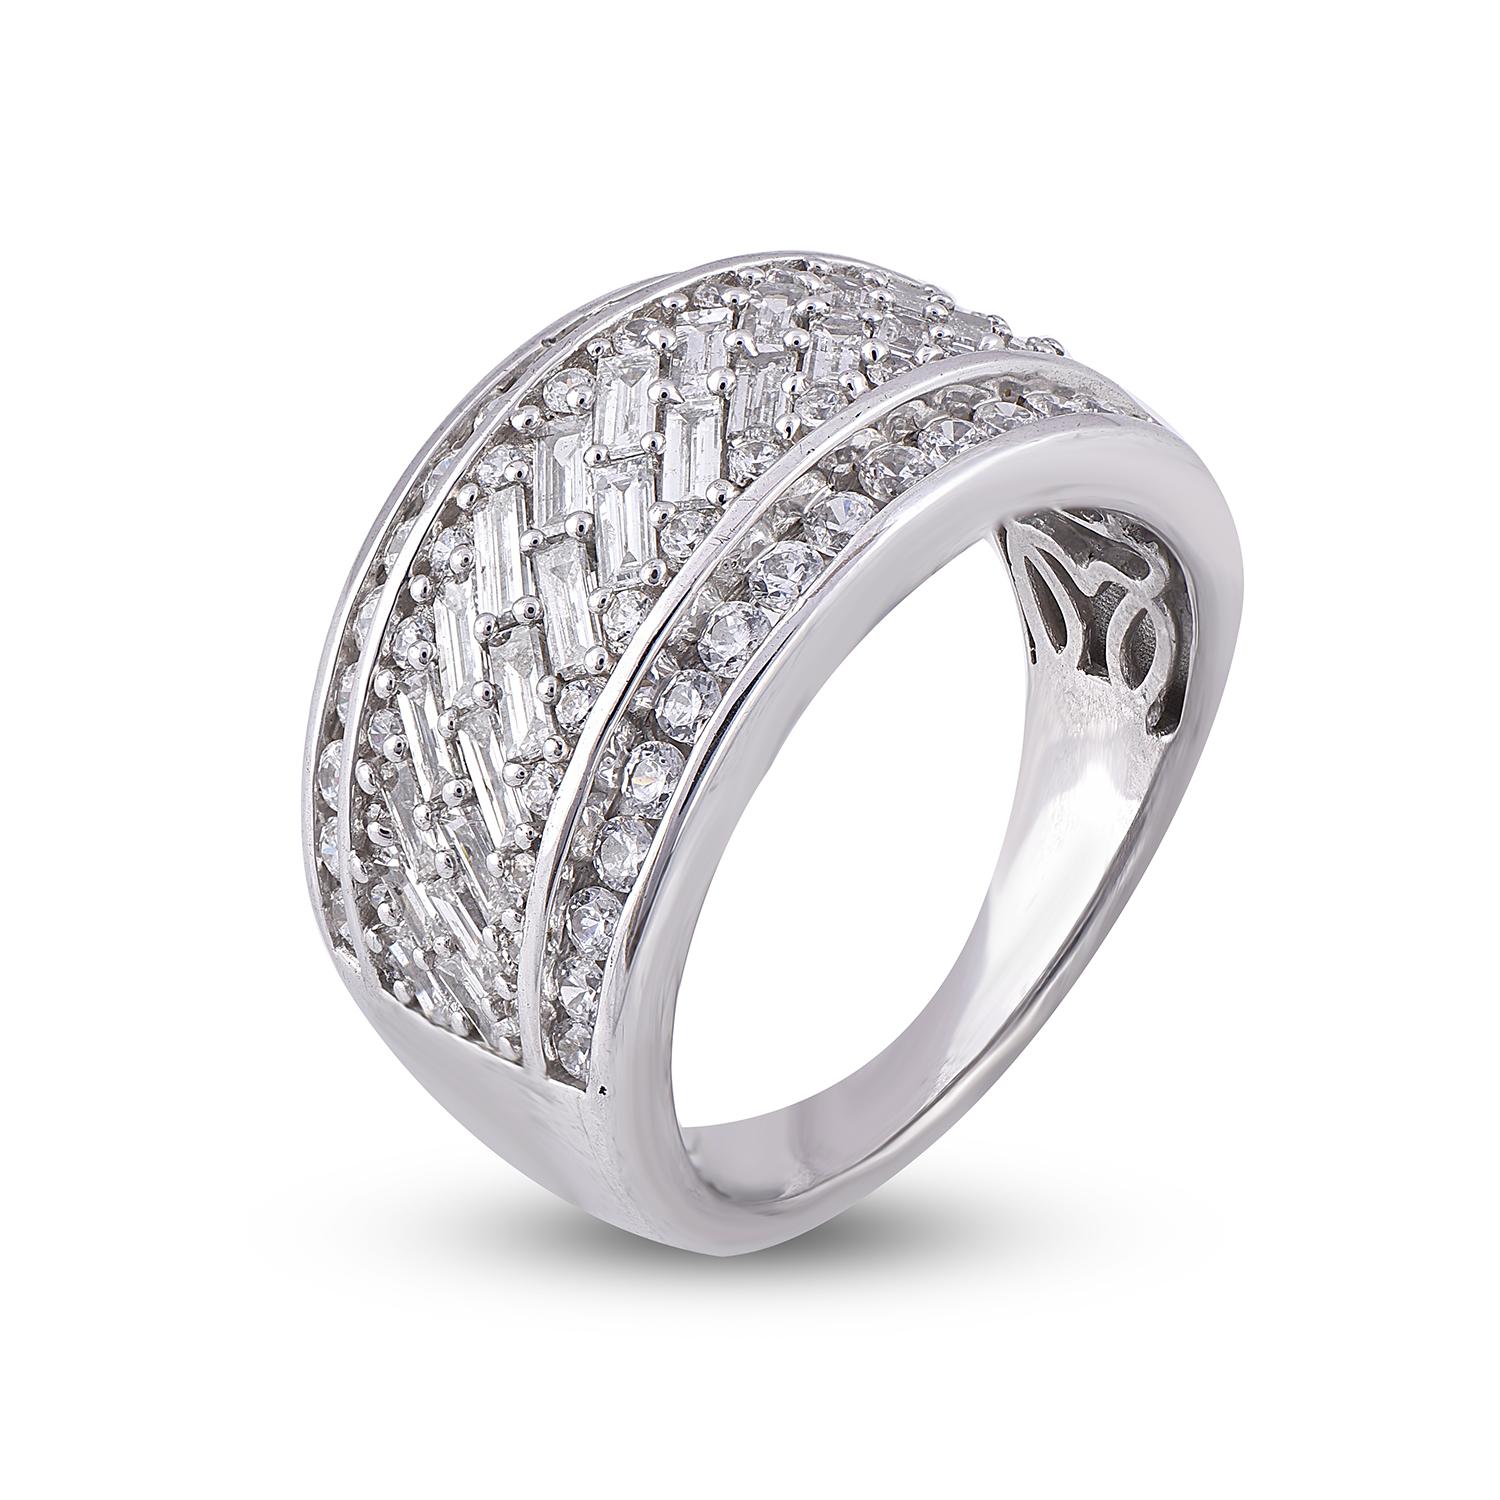 Designed with romance in mind, this diamond wide wedding band increases the sparkle factor. The ring is crafted from 14 karat gold in your choice of white, rose, or yellow, and features 54 round and 28 Baguette cut diamond set in Channel setting,